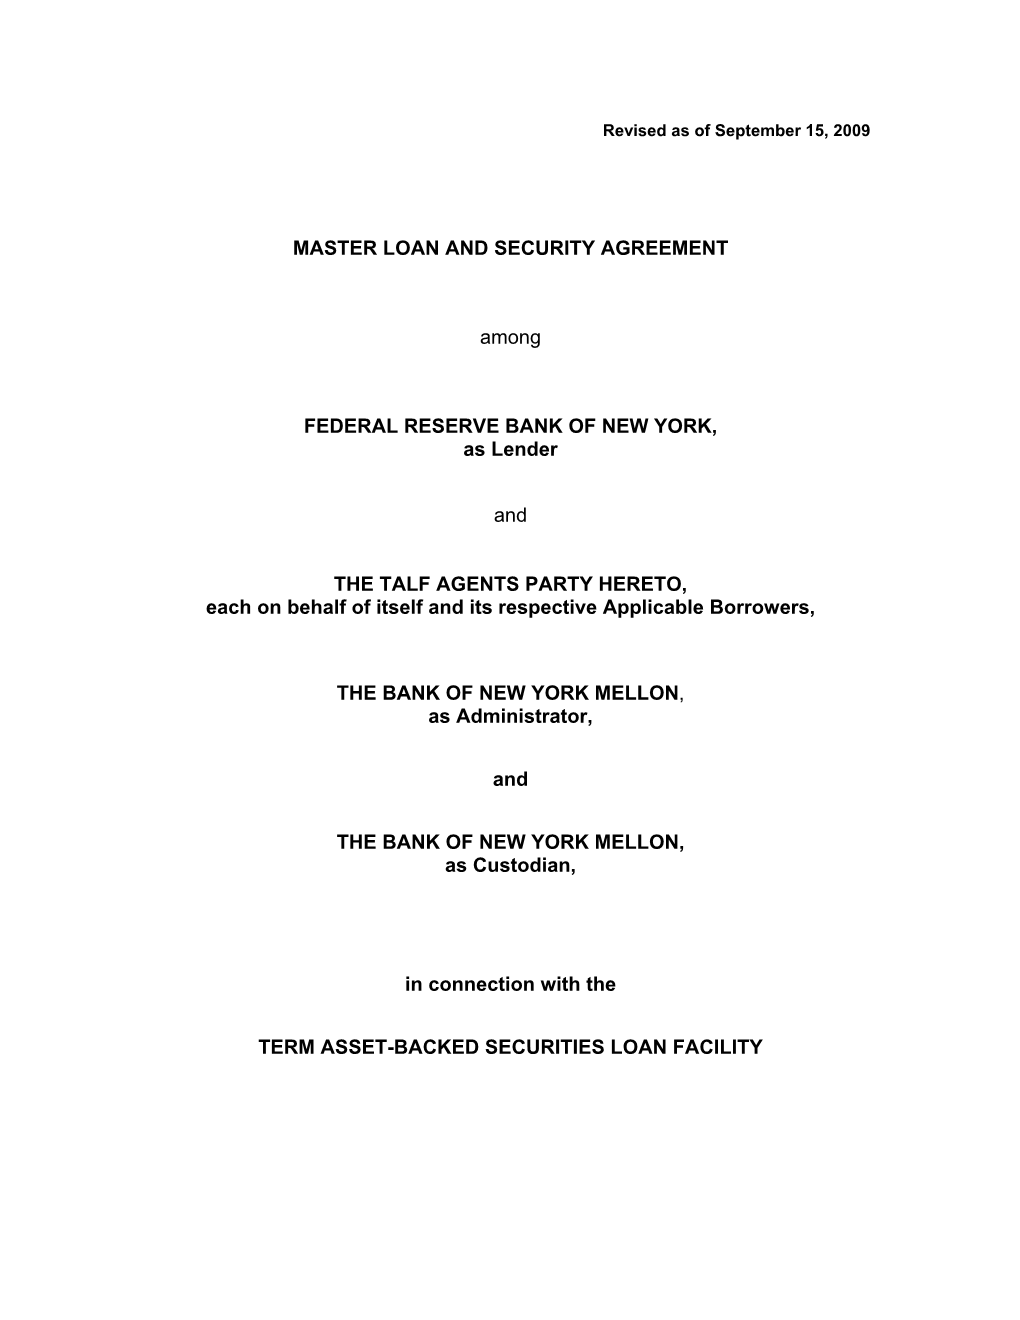 Master Loan and Security Agreement